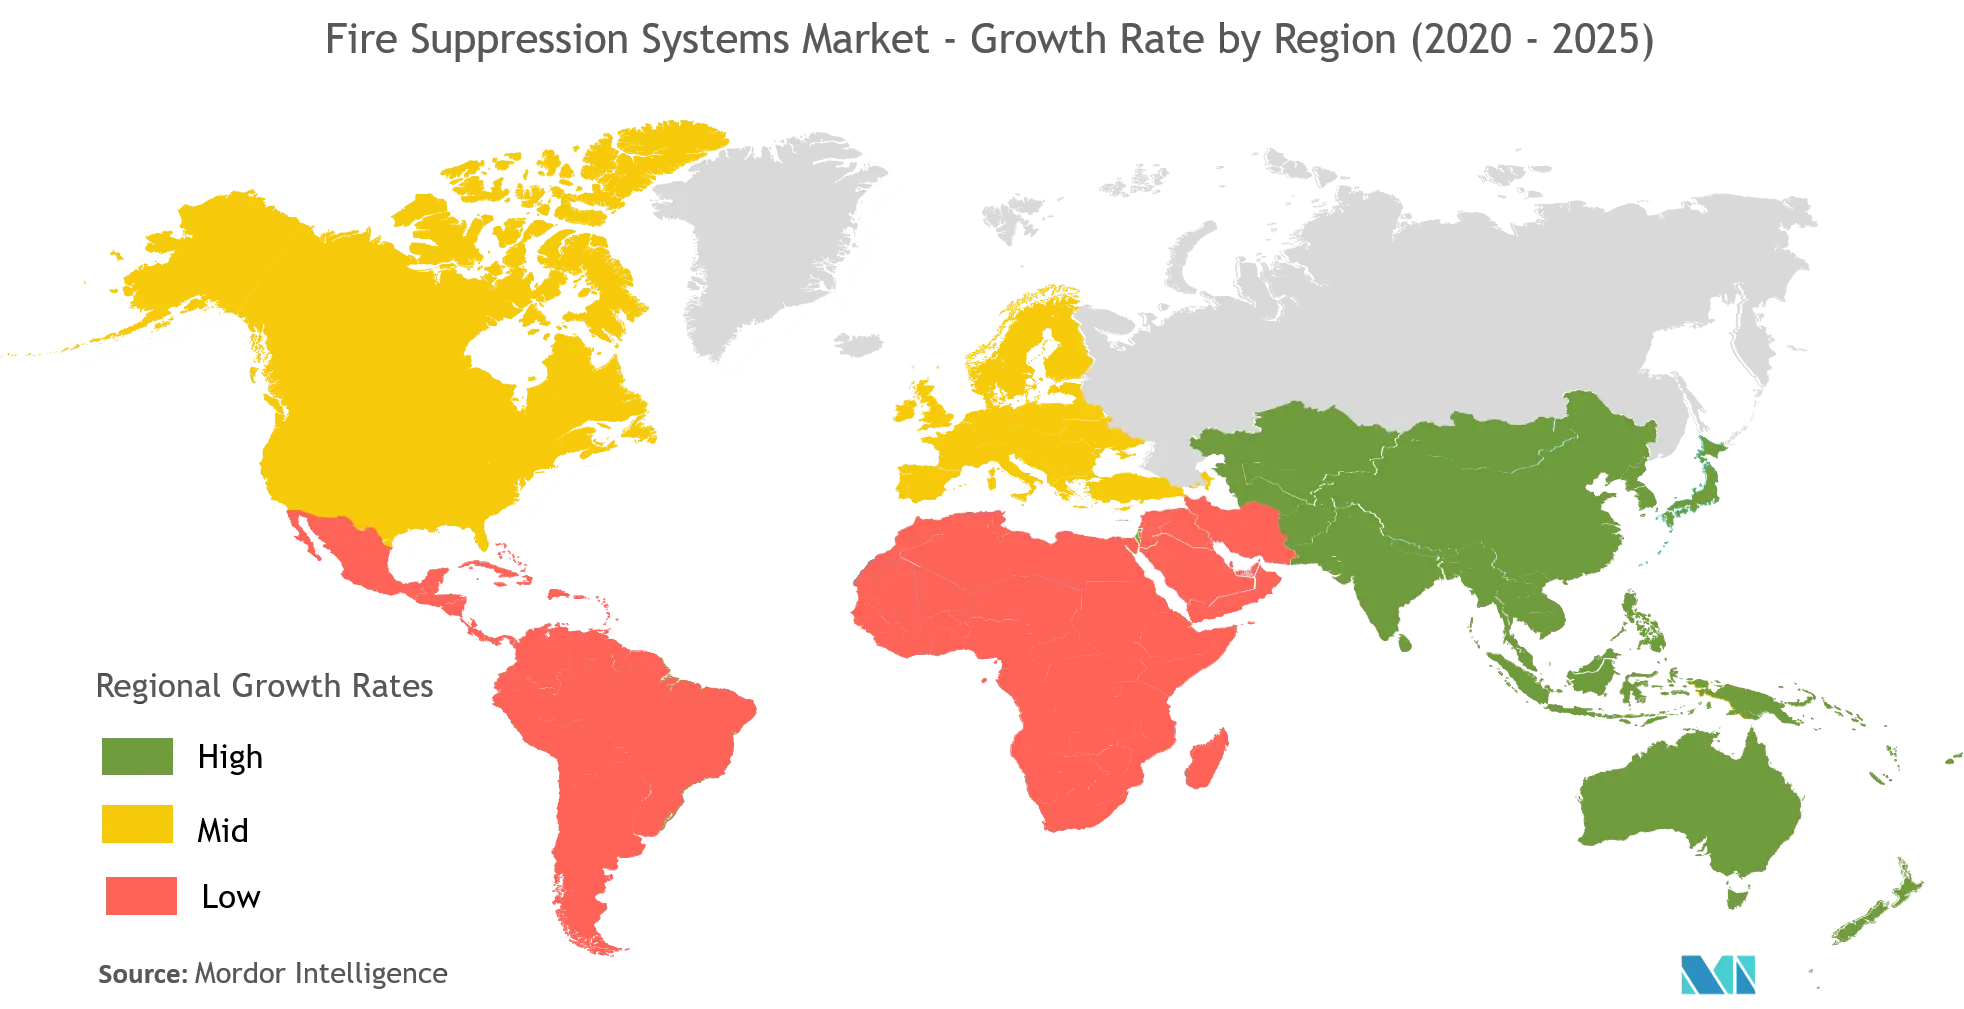 Fire Suppression Systems Market Analysis